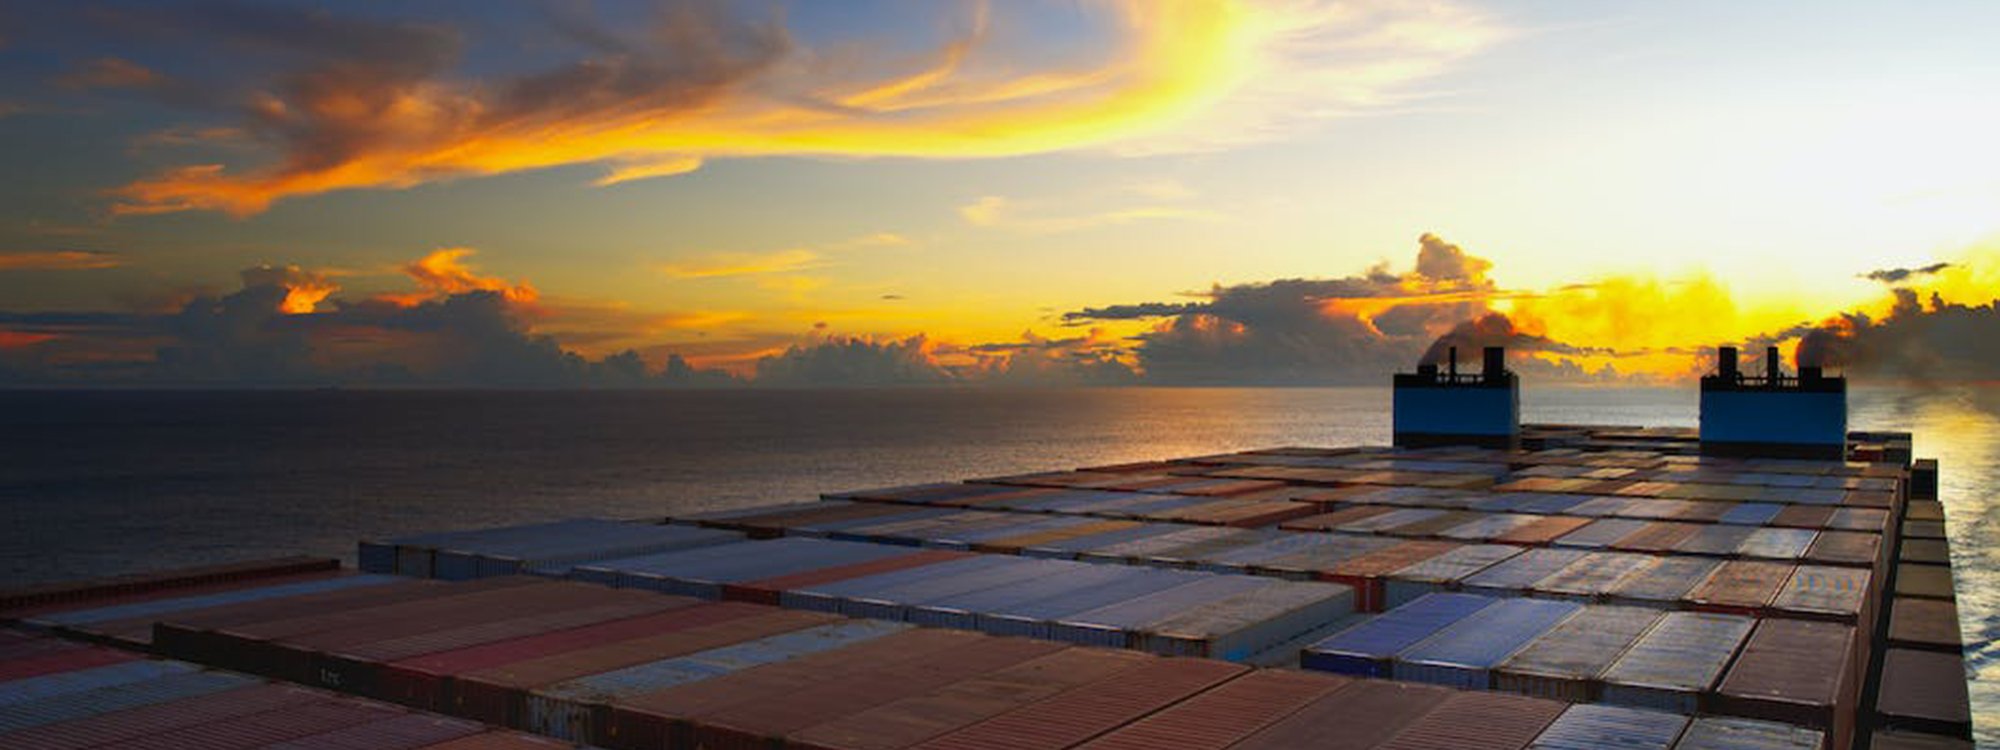 Shipping containers being transported by sea